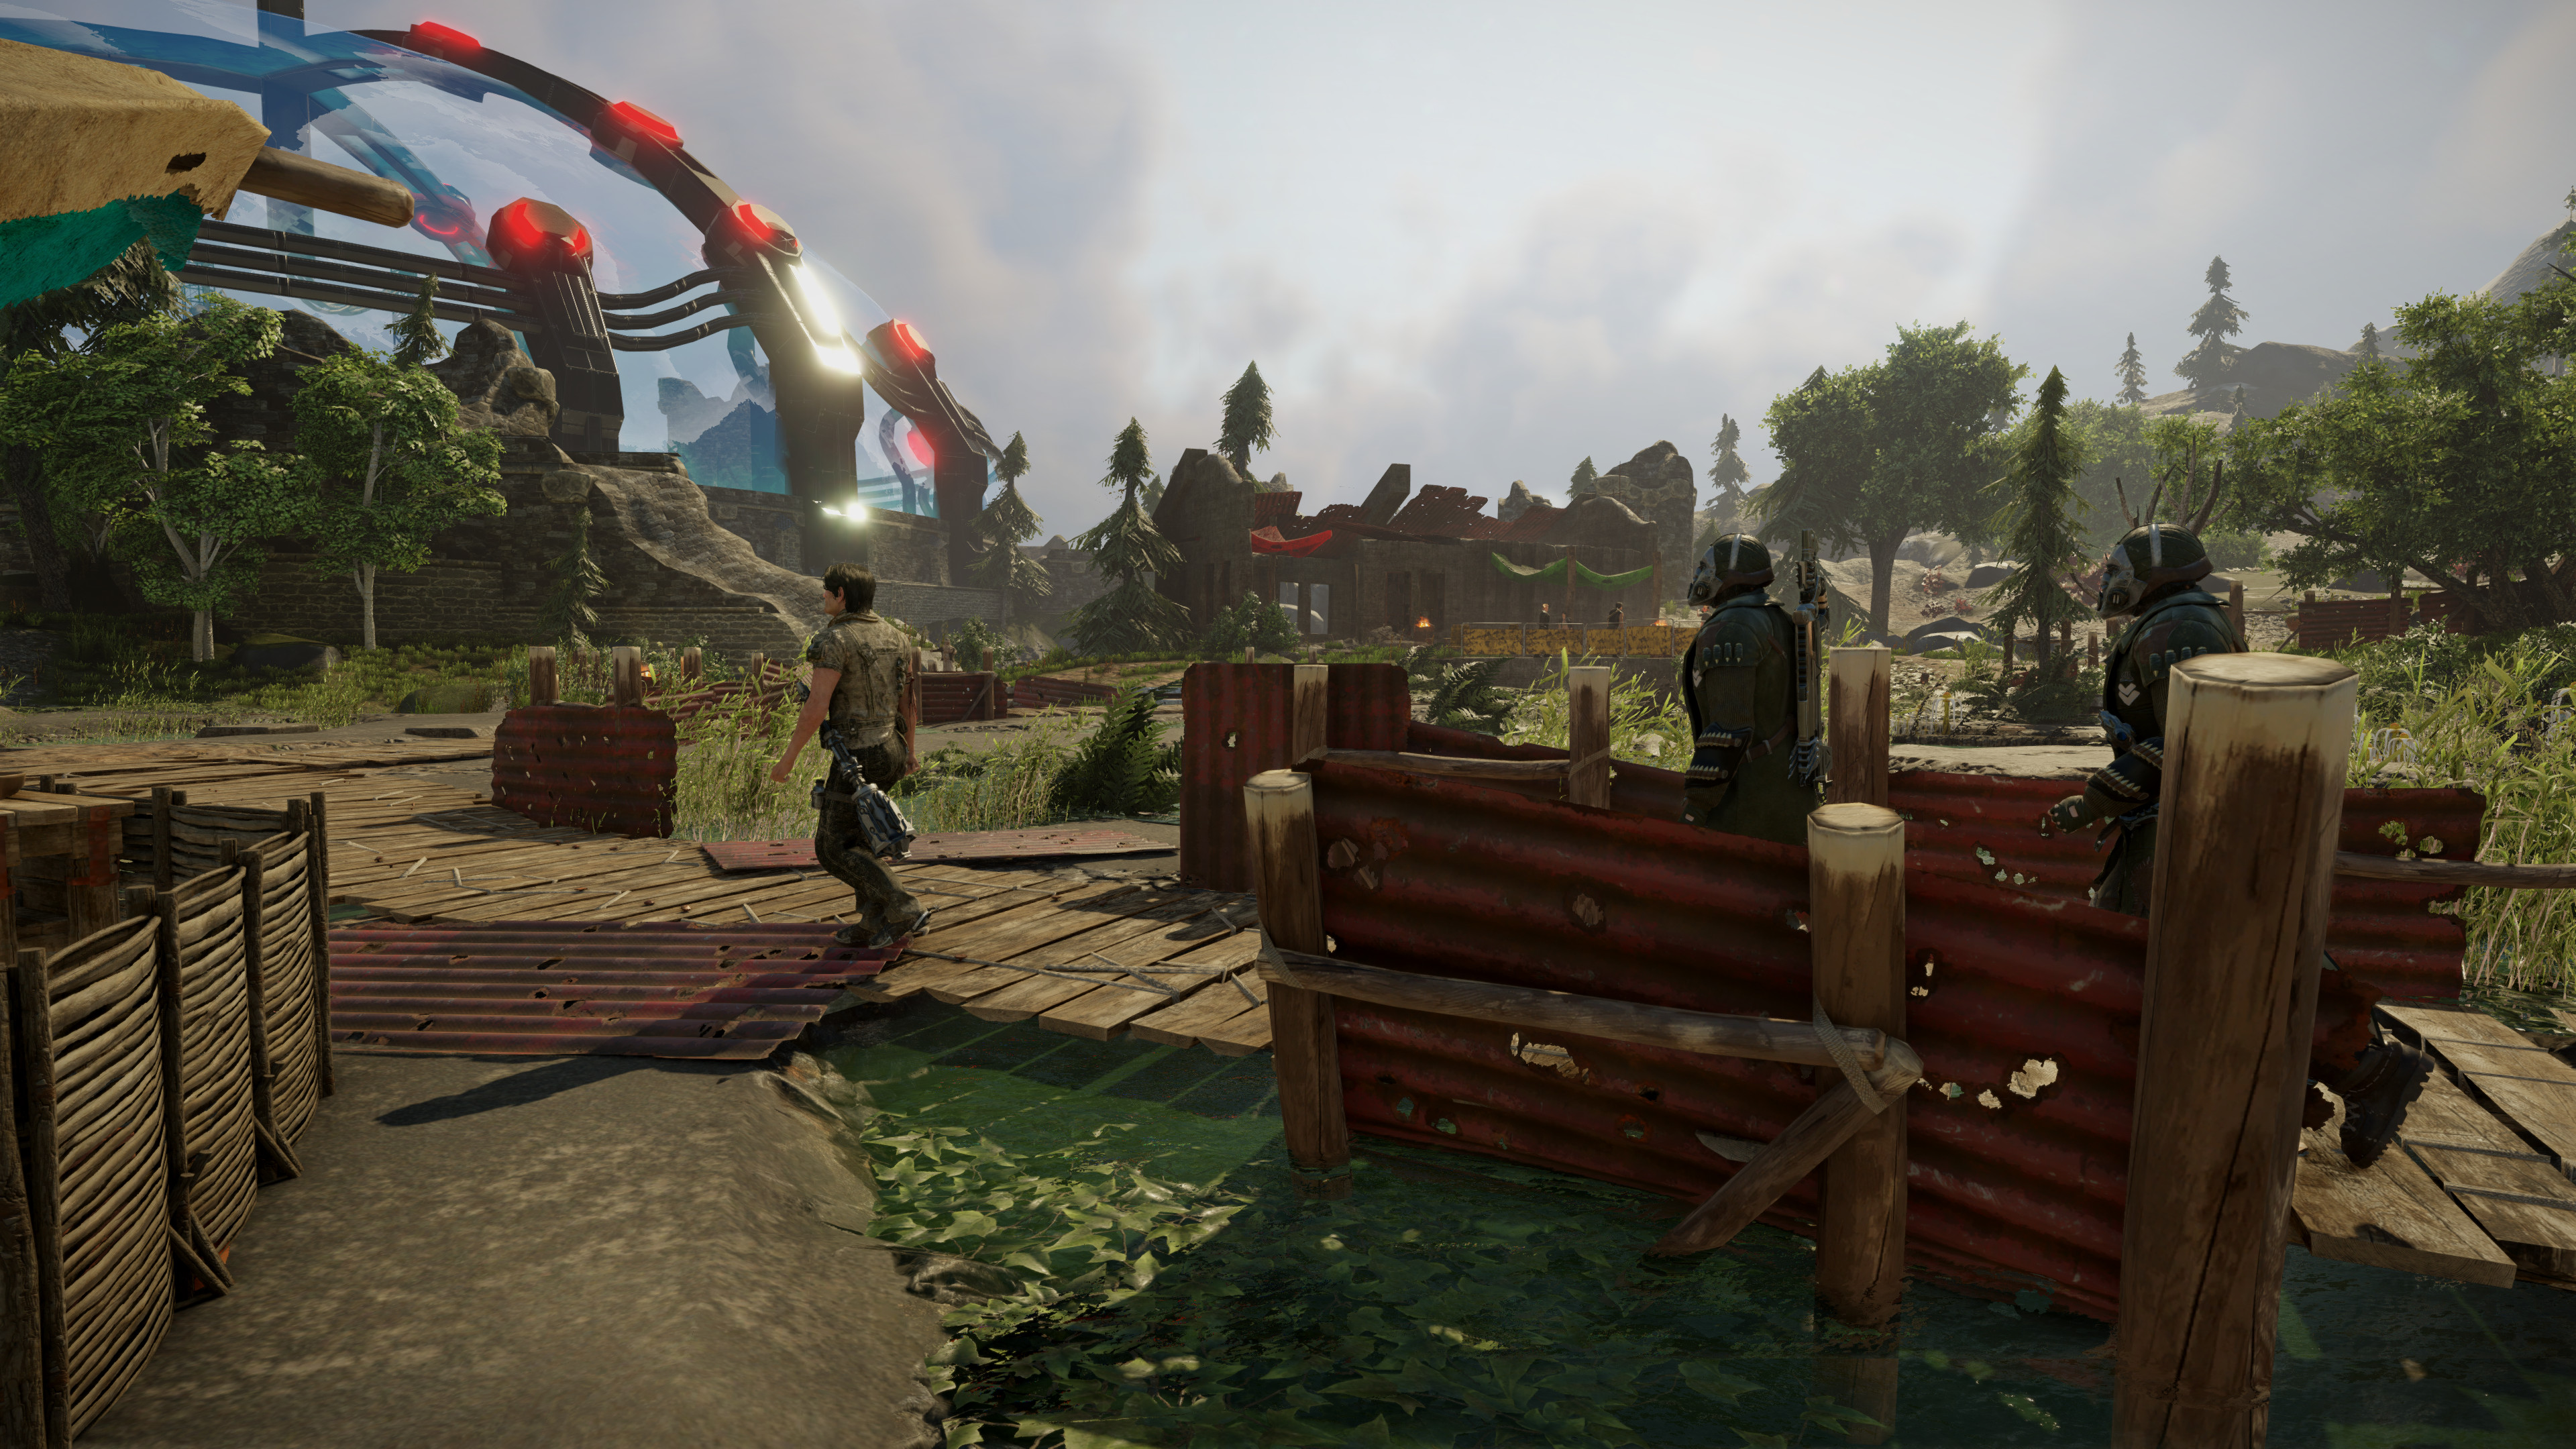 Media asset in full size related to 3dfxzone.it news item entitled as follows: Gameplay trailer e screenshots in 4K del game action RPG fantasy ELEX | Image Name: news24805_ELEX-Screenshot_4.jpg